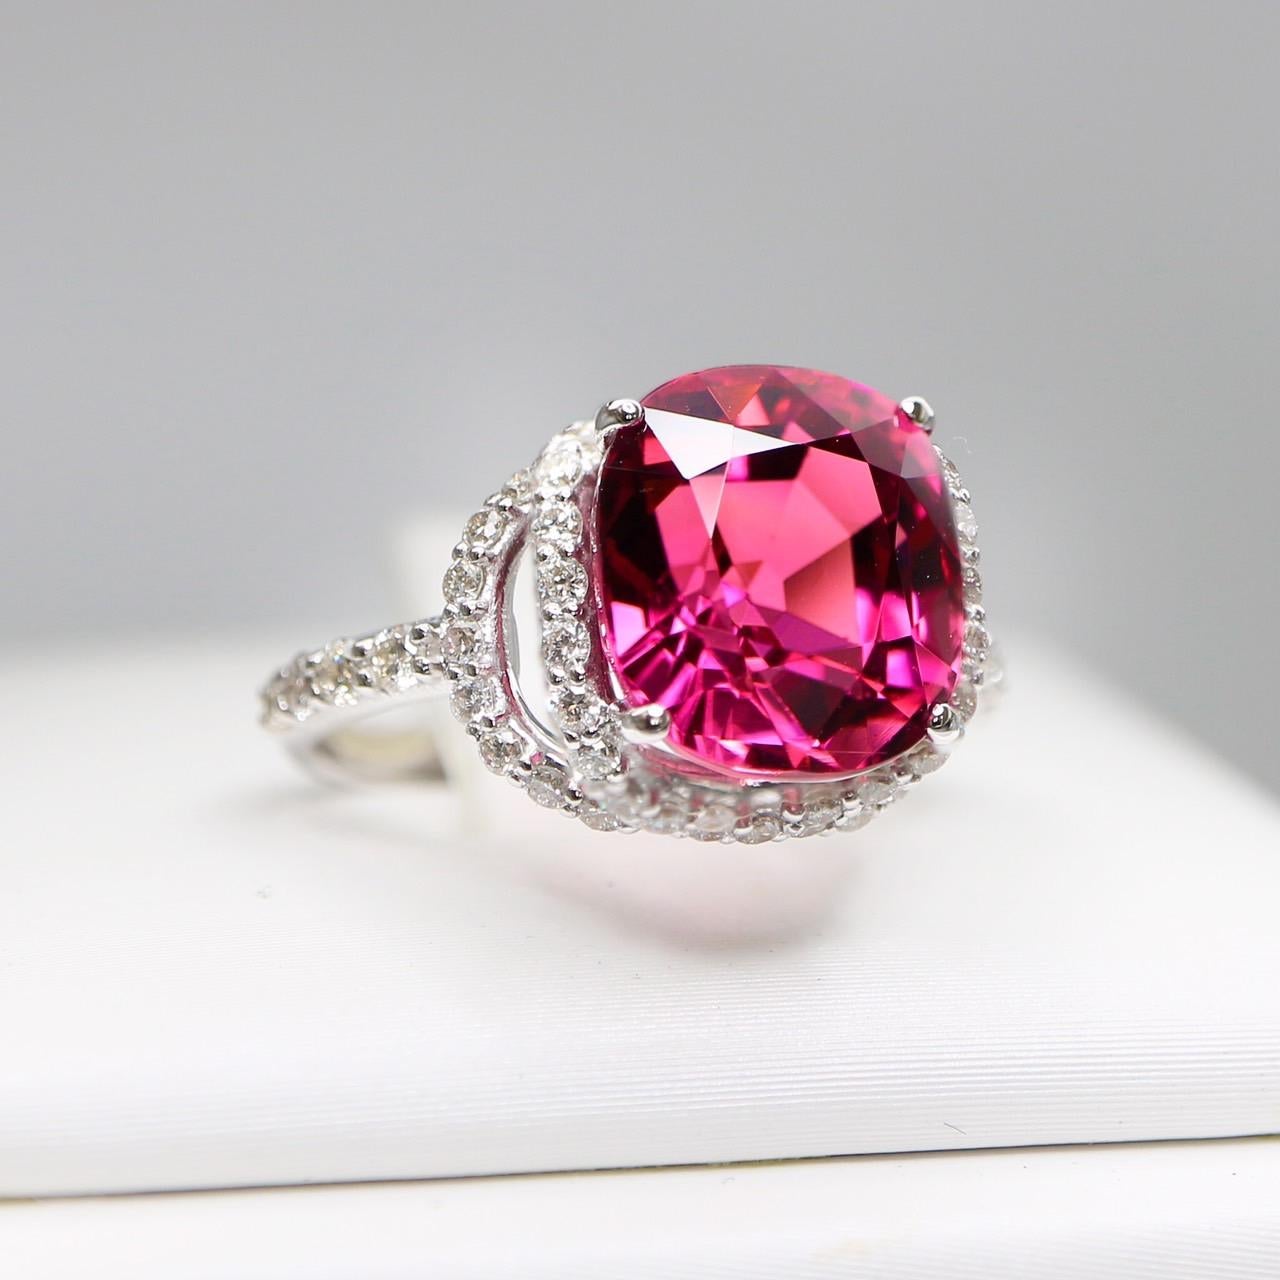 *NRP* GIA 14K 4.90 Ct Top Pink Tourmaline Antique Art Deco Style Engagement Ring 1